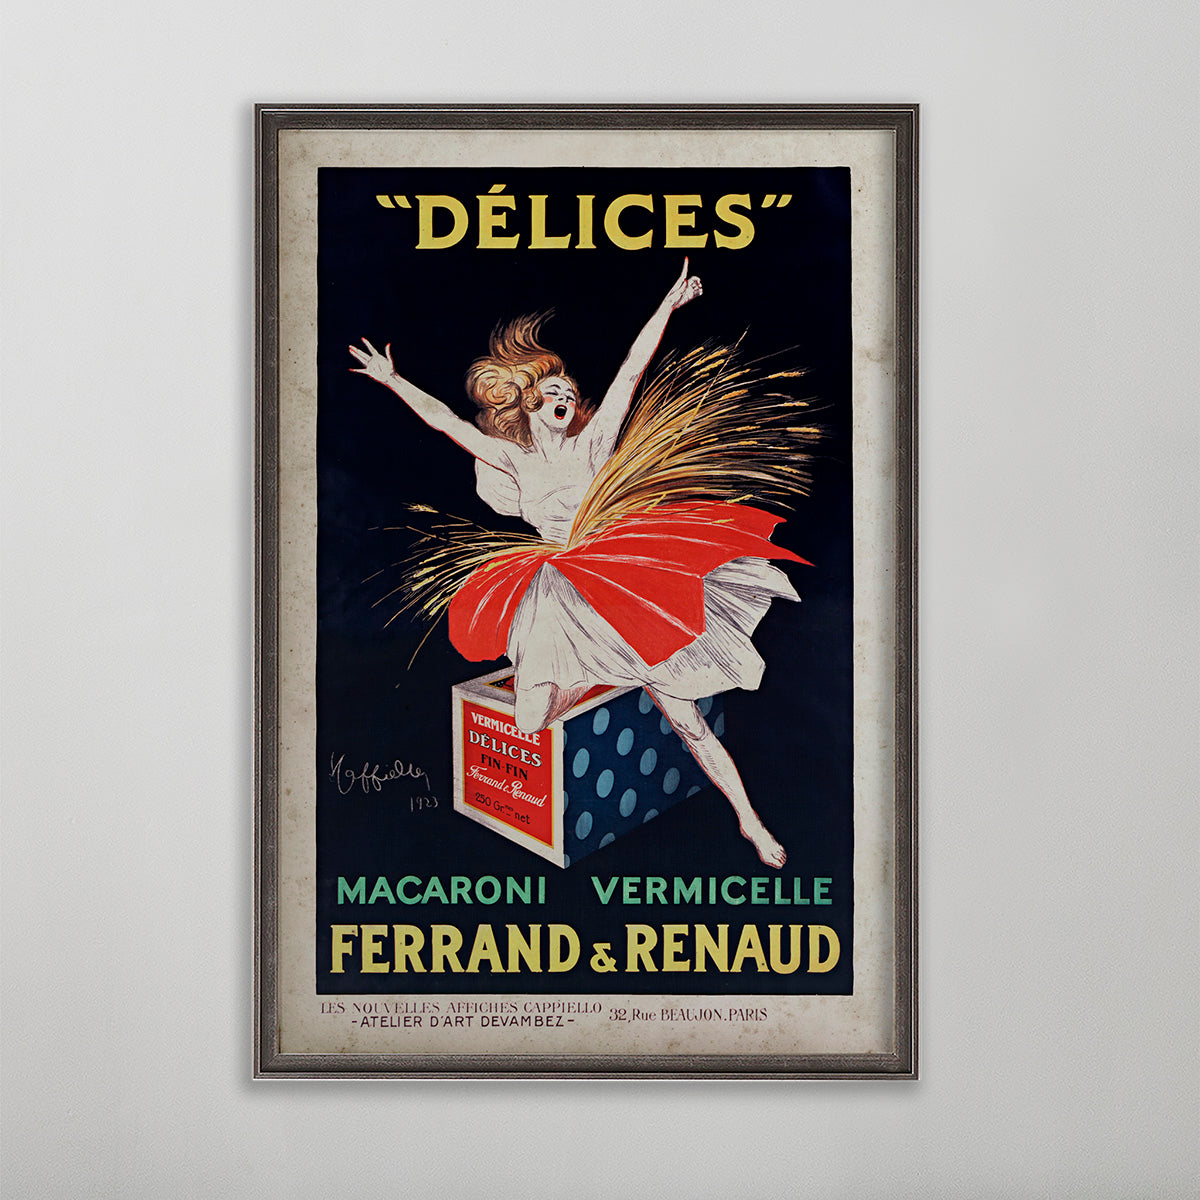 Délices Maceroni Vermicelli vintage poster wall art by leonetto cappiello. Woman wearing white dress.